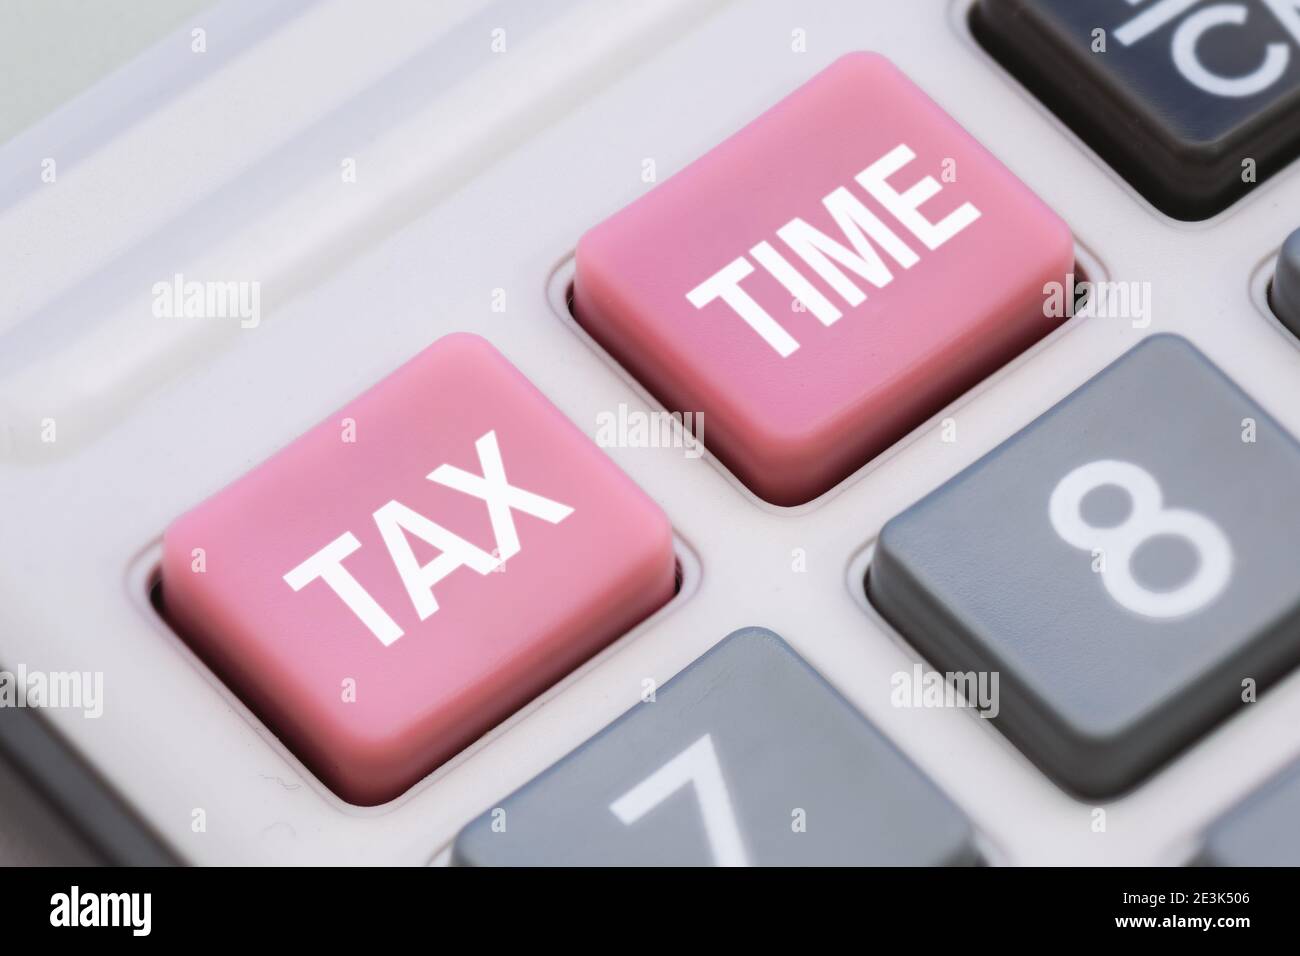 Close Up of Tax Time Words on Calculator Buttons Stock Photo